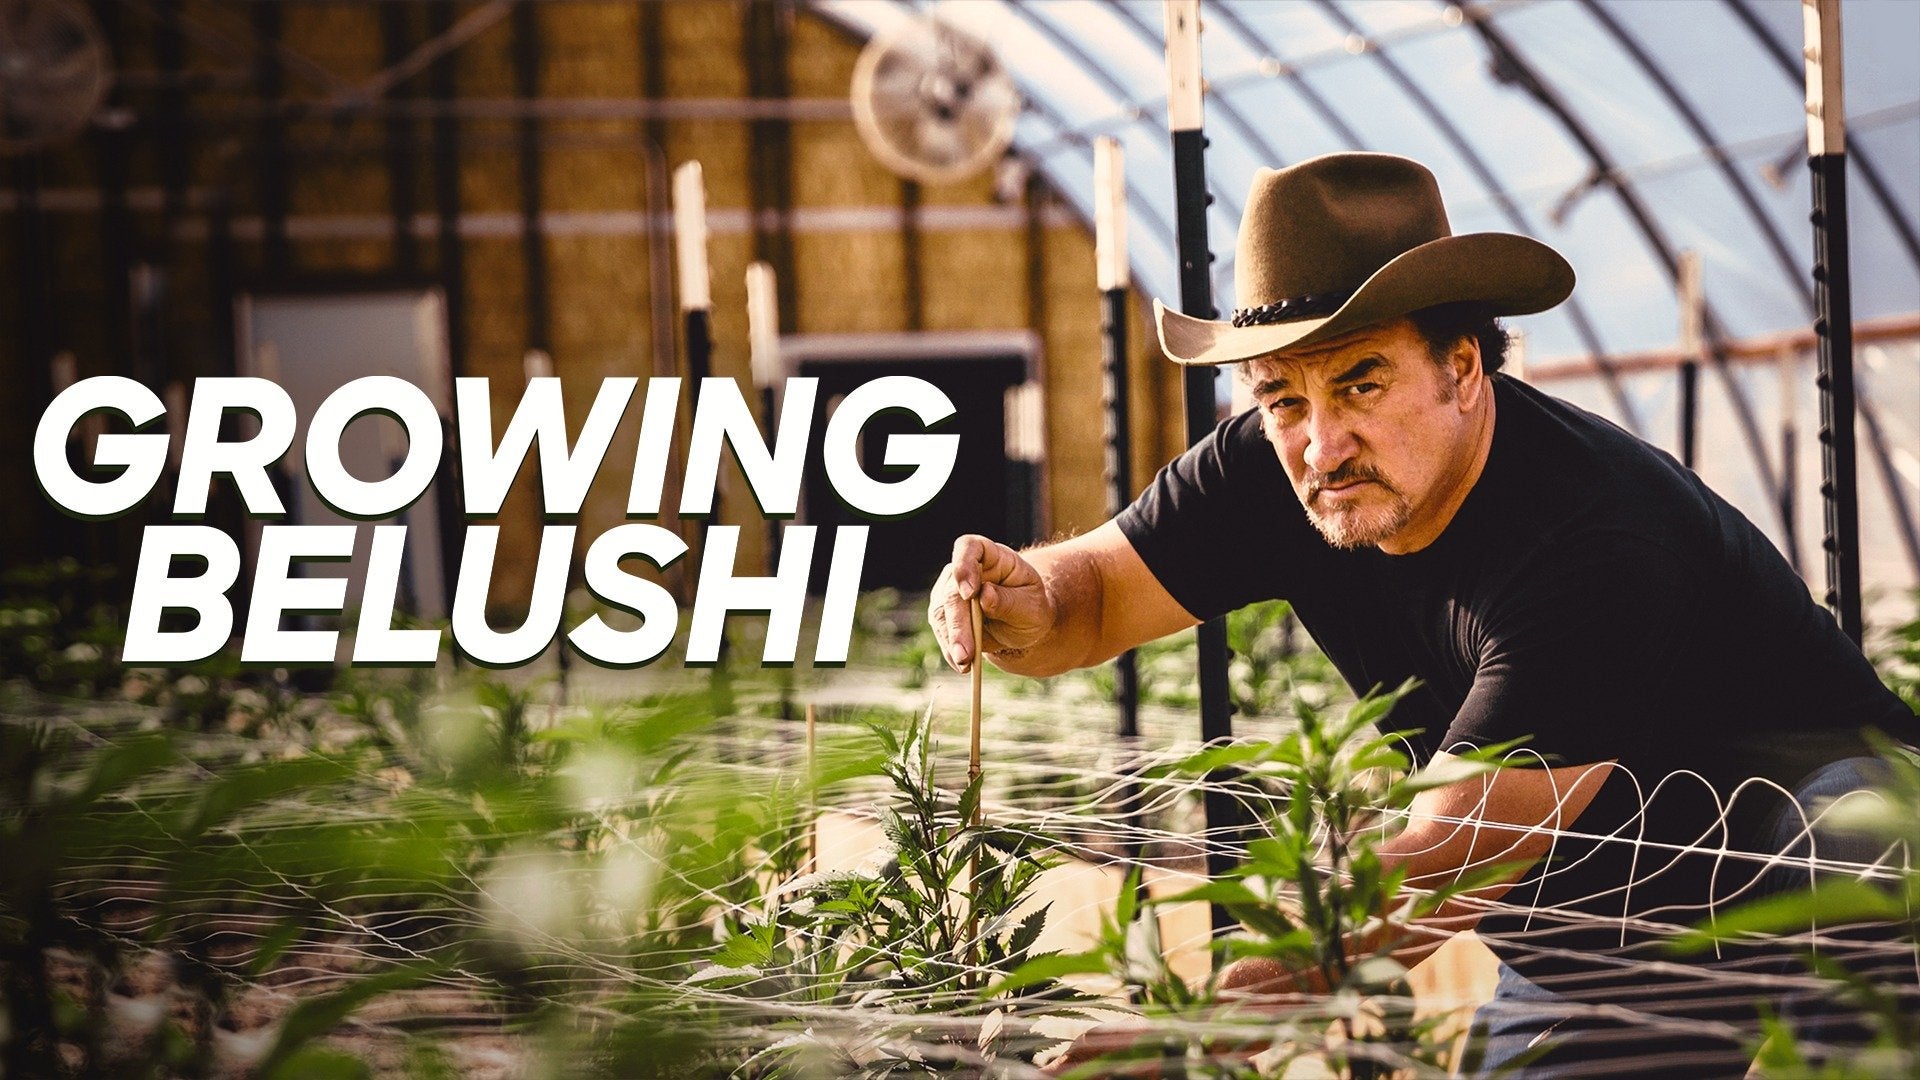 Growing Belushi S01E02 720p  A Mission from God